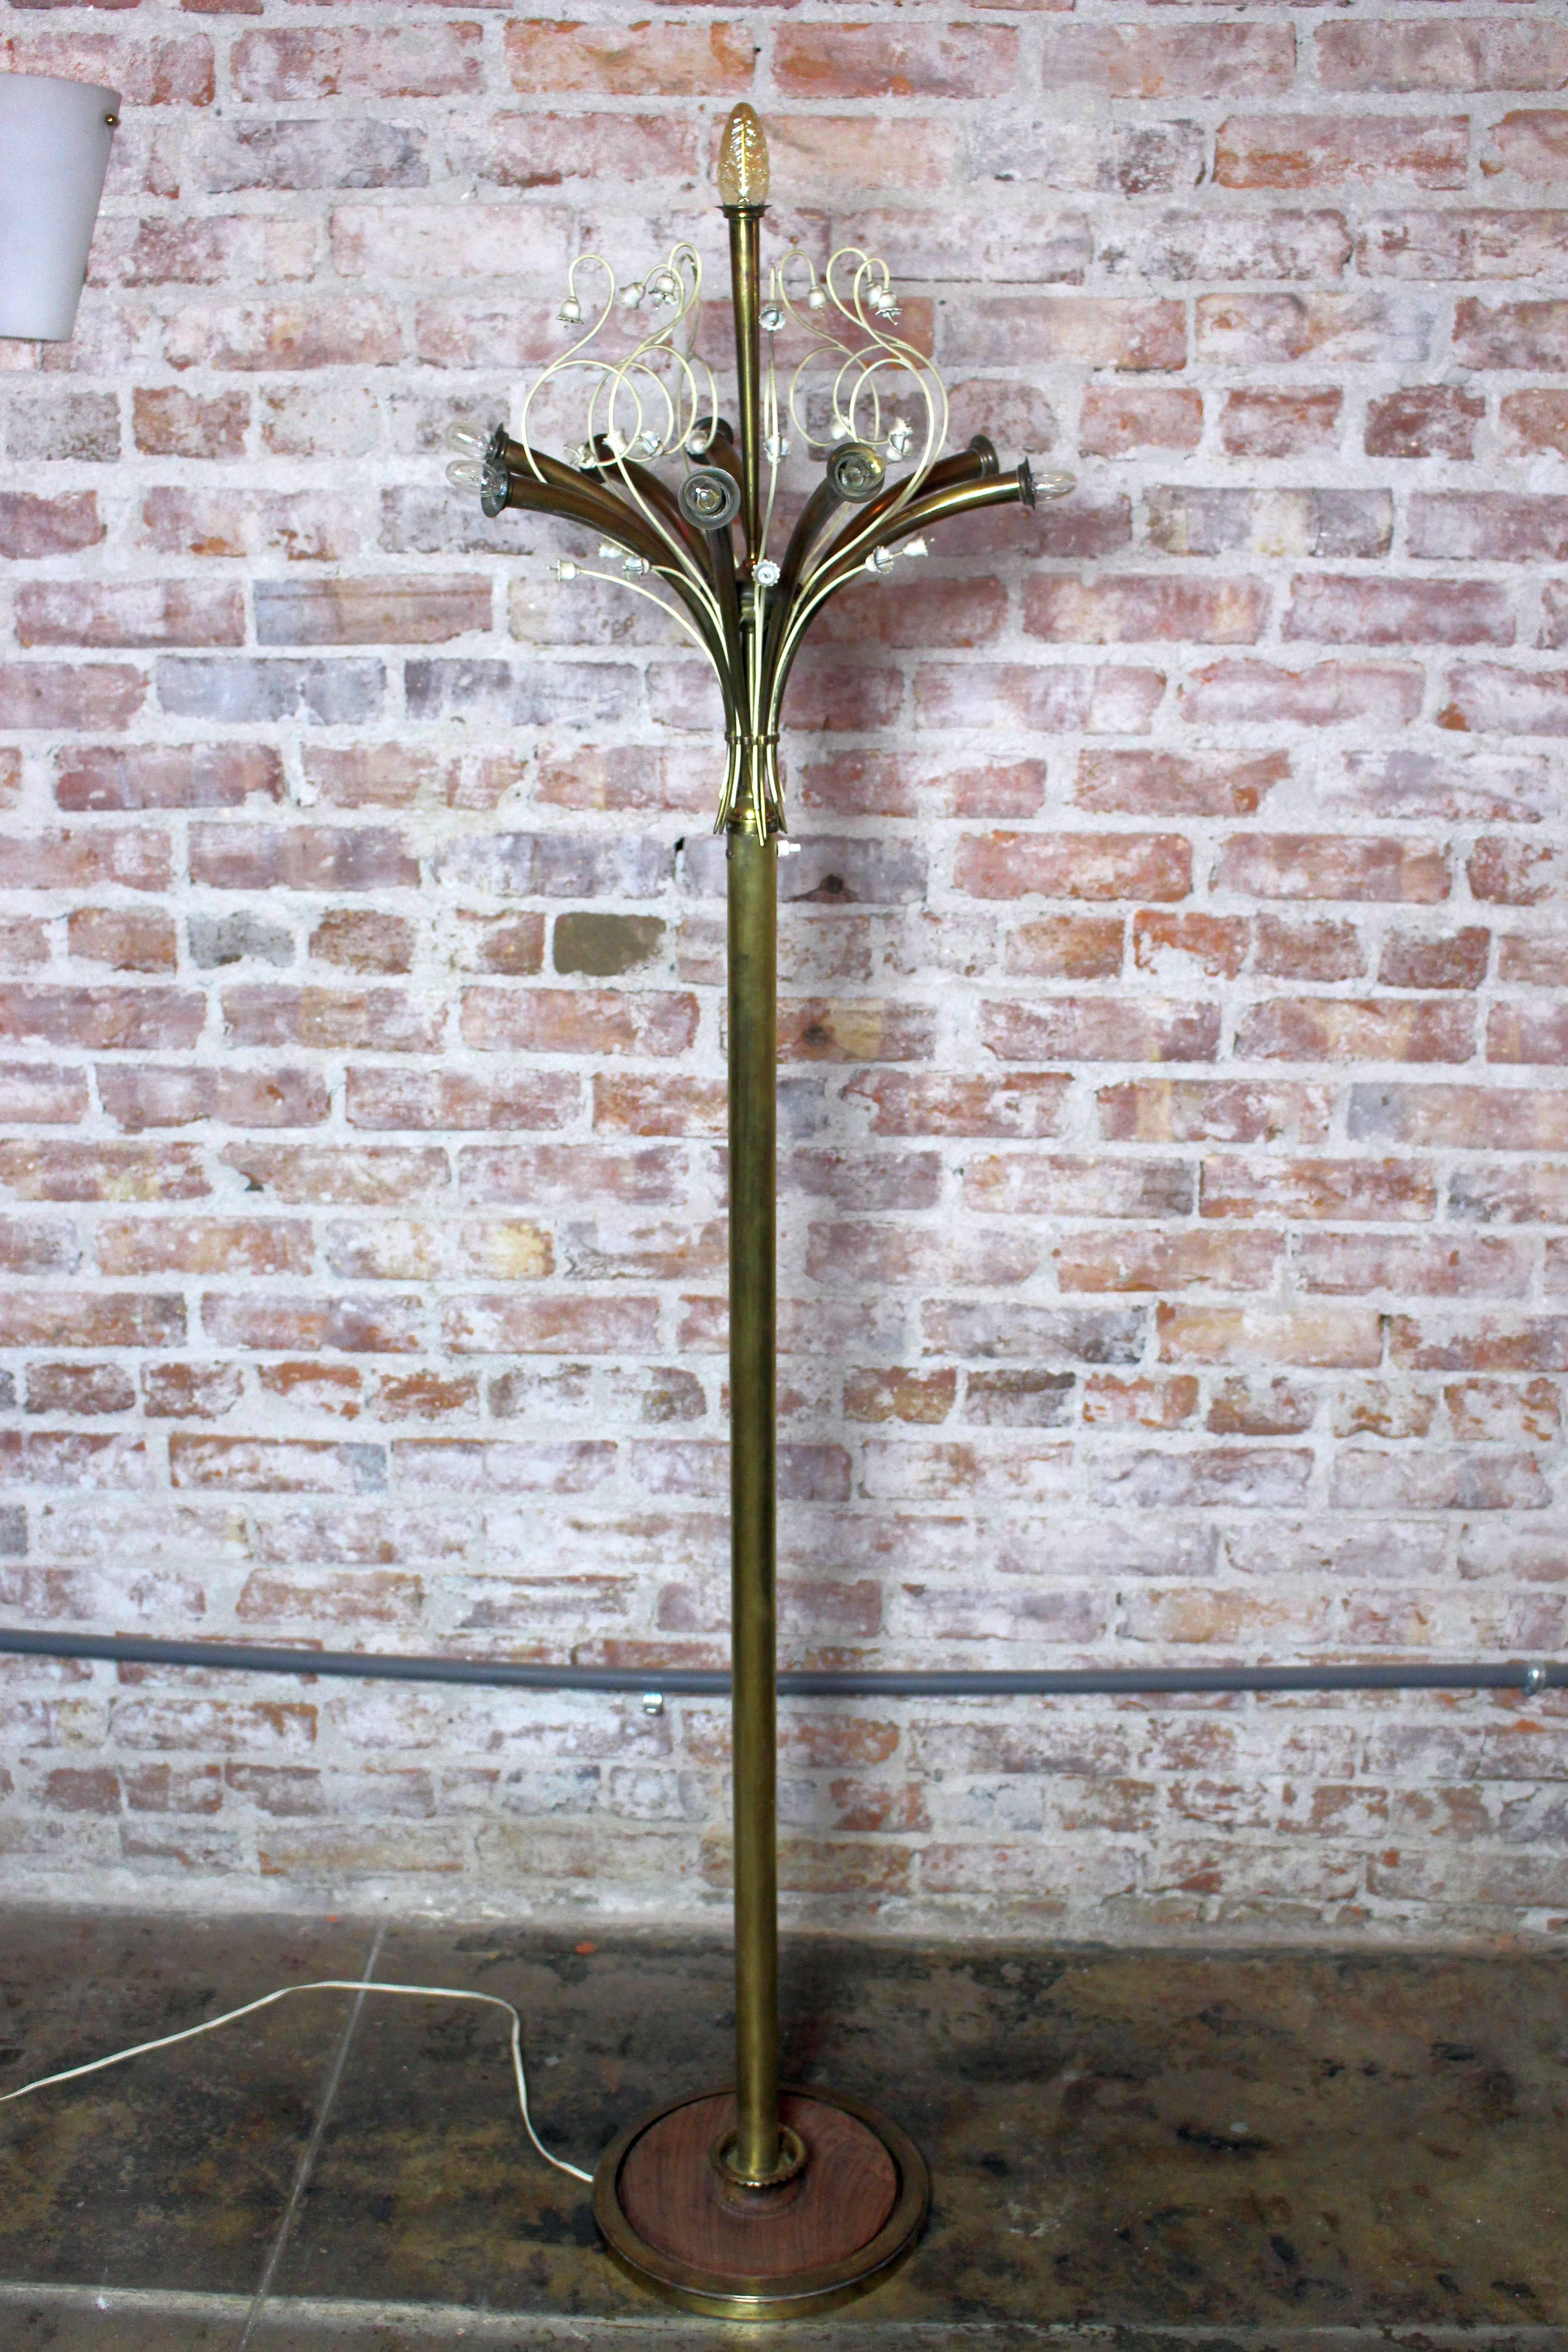 1950s Italian brass floor lamp with the rosewood and brass base.

